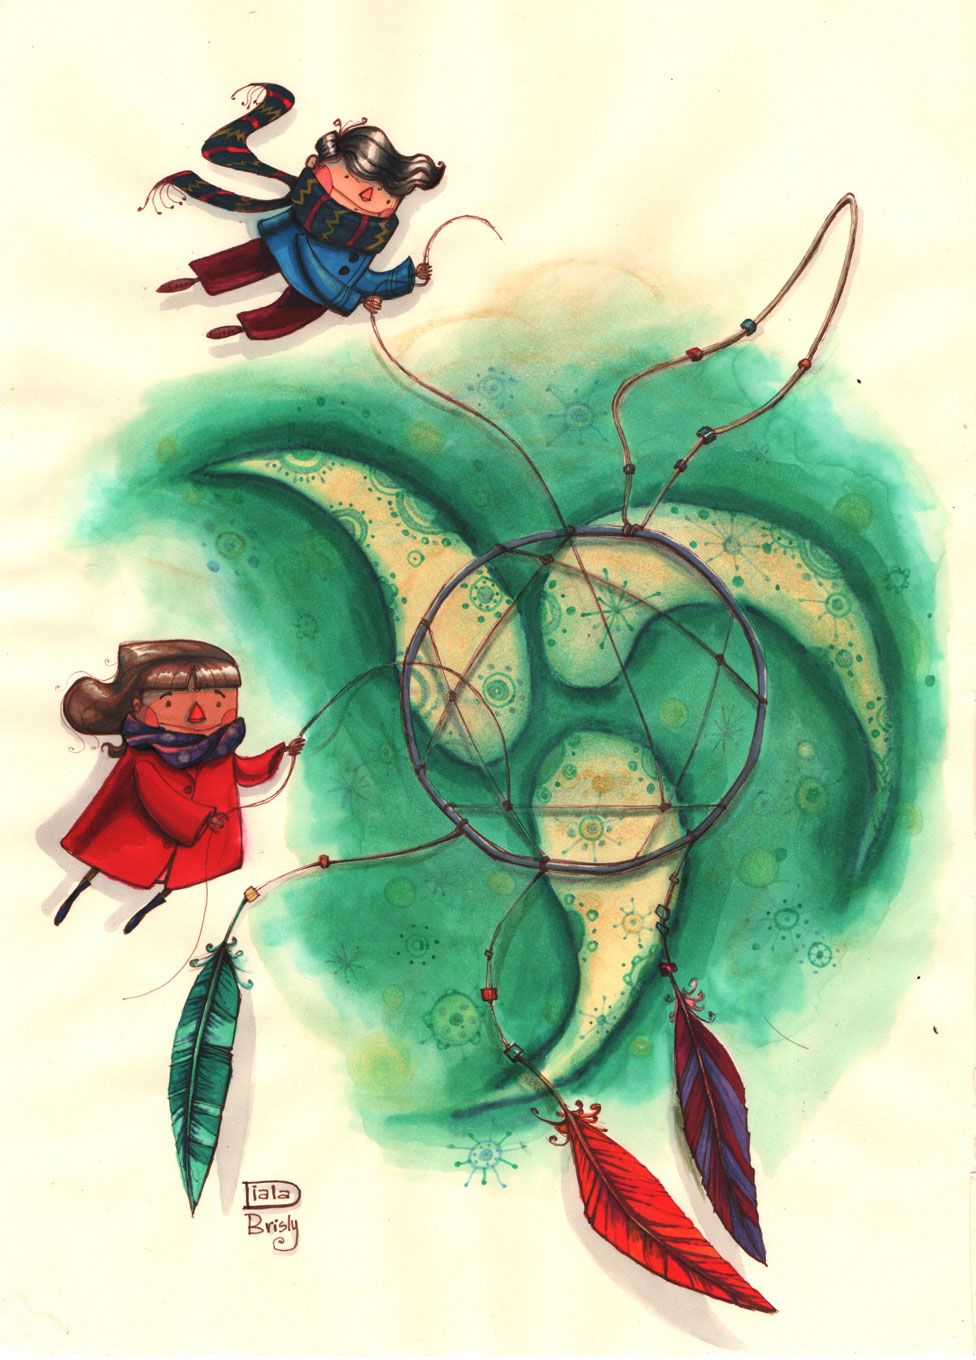 Dreamcatcher - an illustration by Diala Brisly, encouraging children to hang on to their dreams